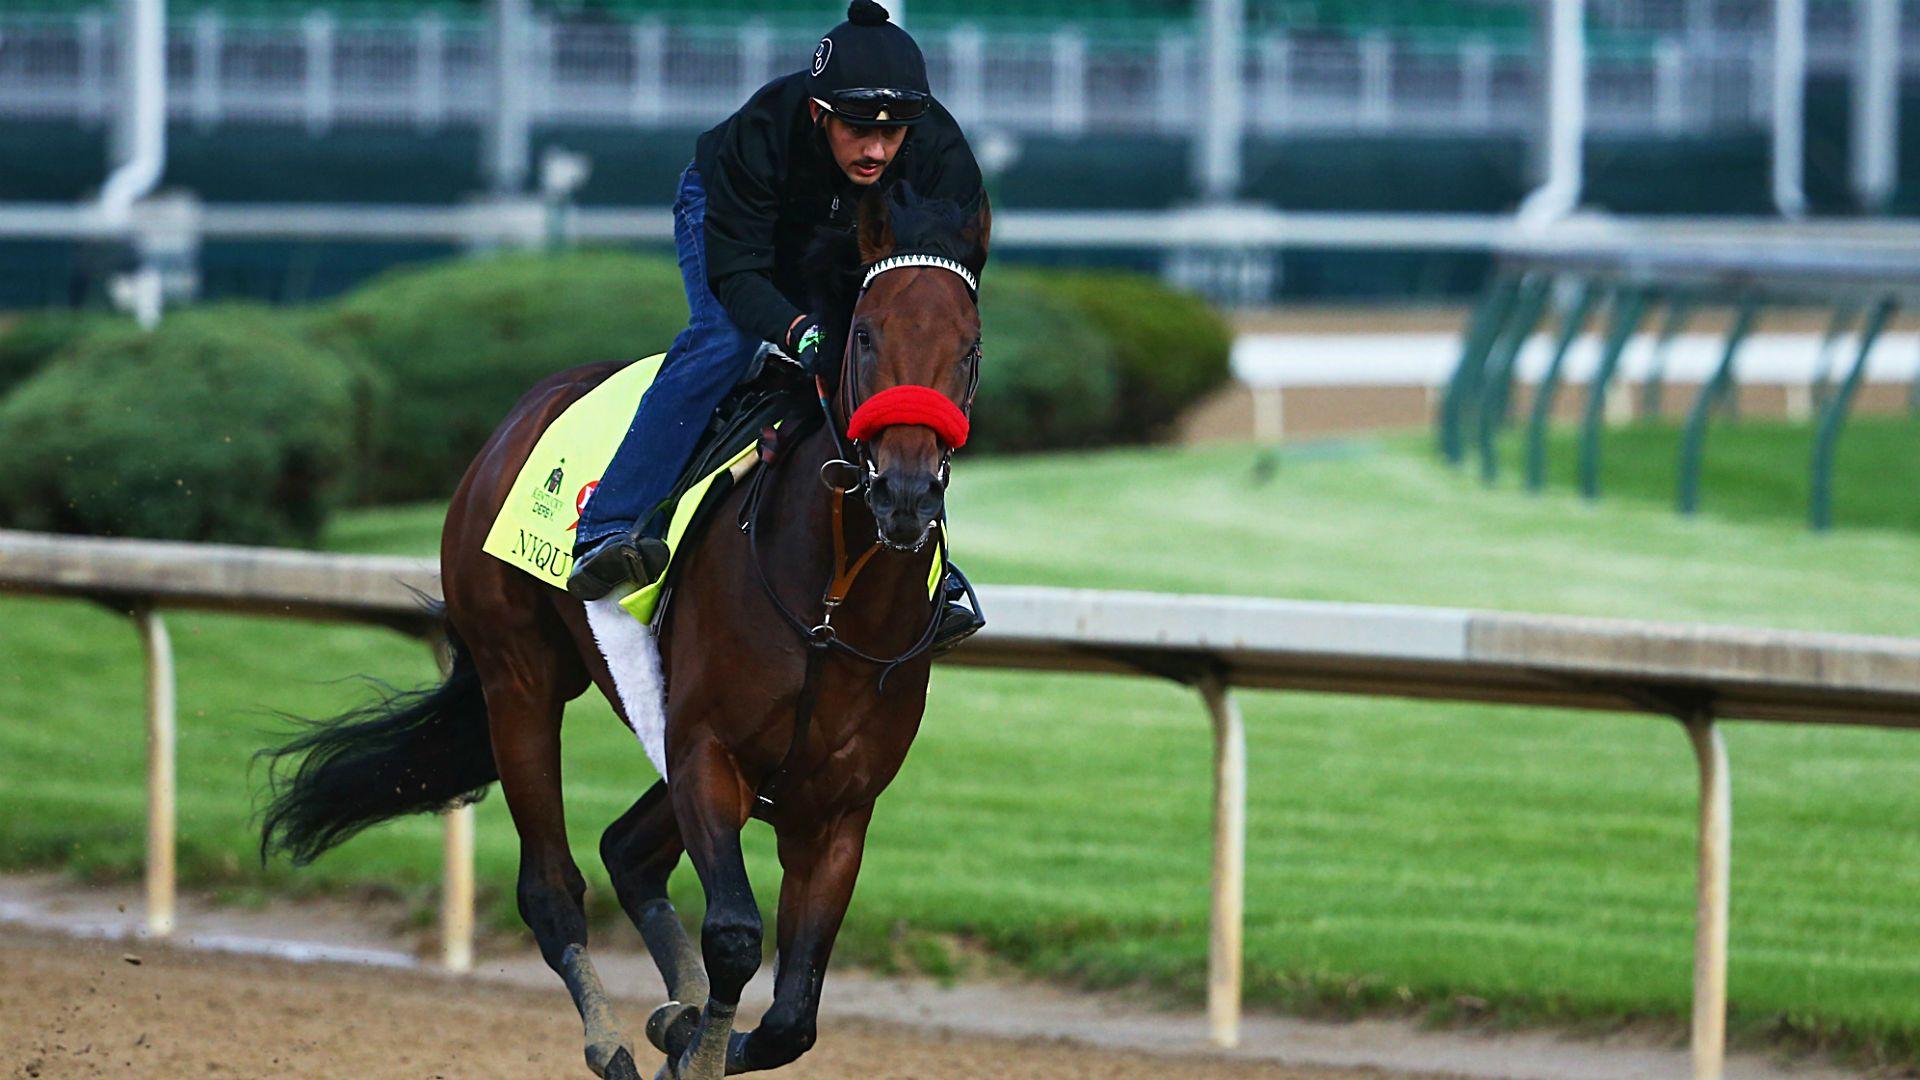 Kentucky Derby 2018: Odds, picks and how to bet on horse racing